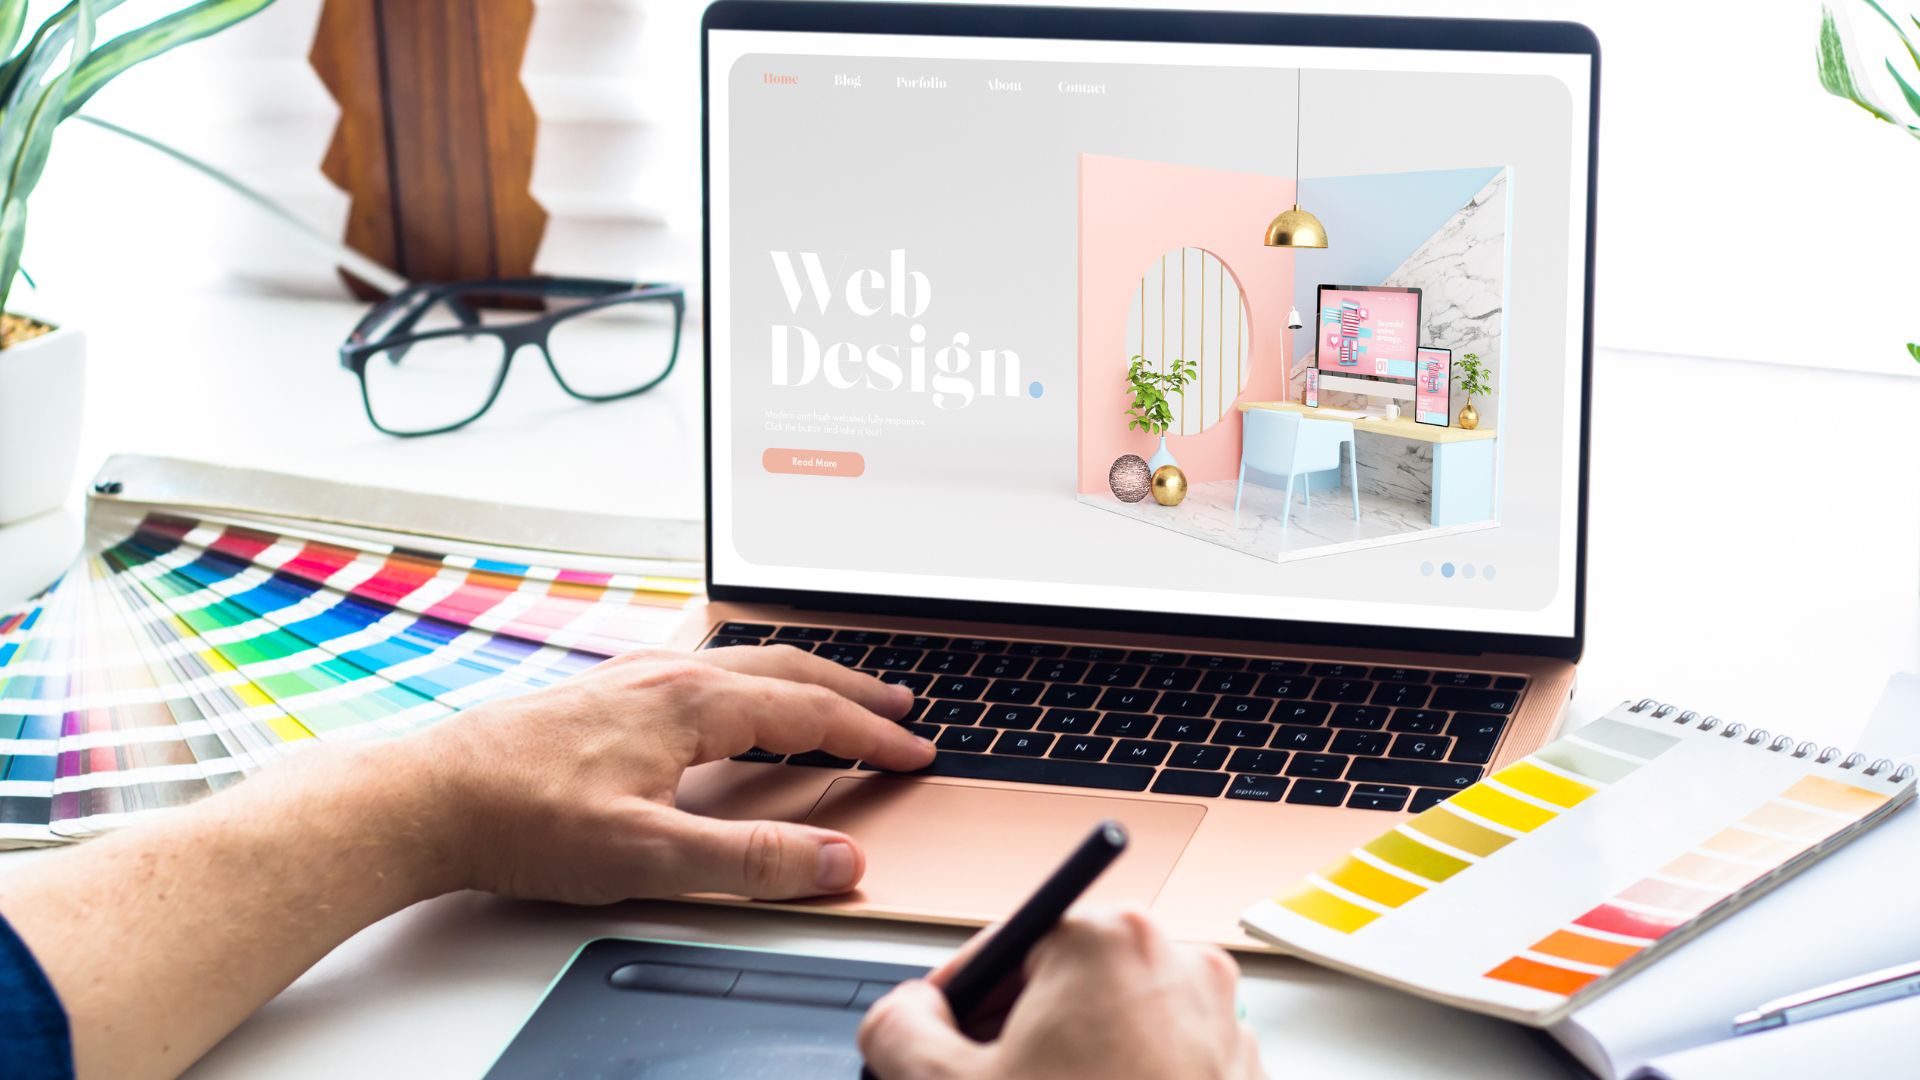 An ui/ux designer from a well-known digital agency in Bali is creating compelling visuals for a website design using a rose gold mac laptop and a huge selection of color pallets